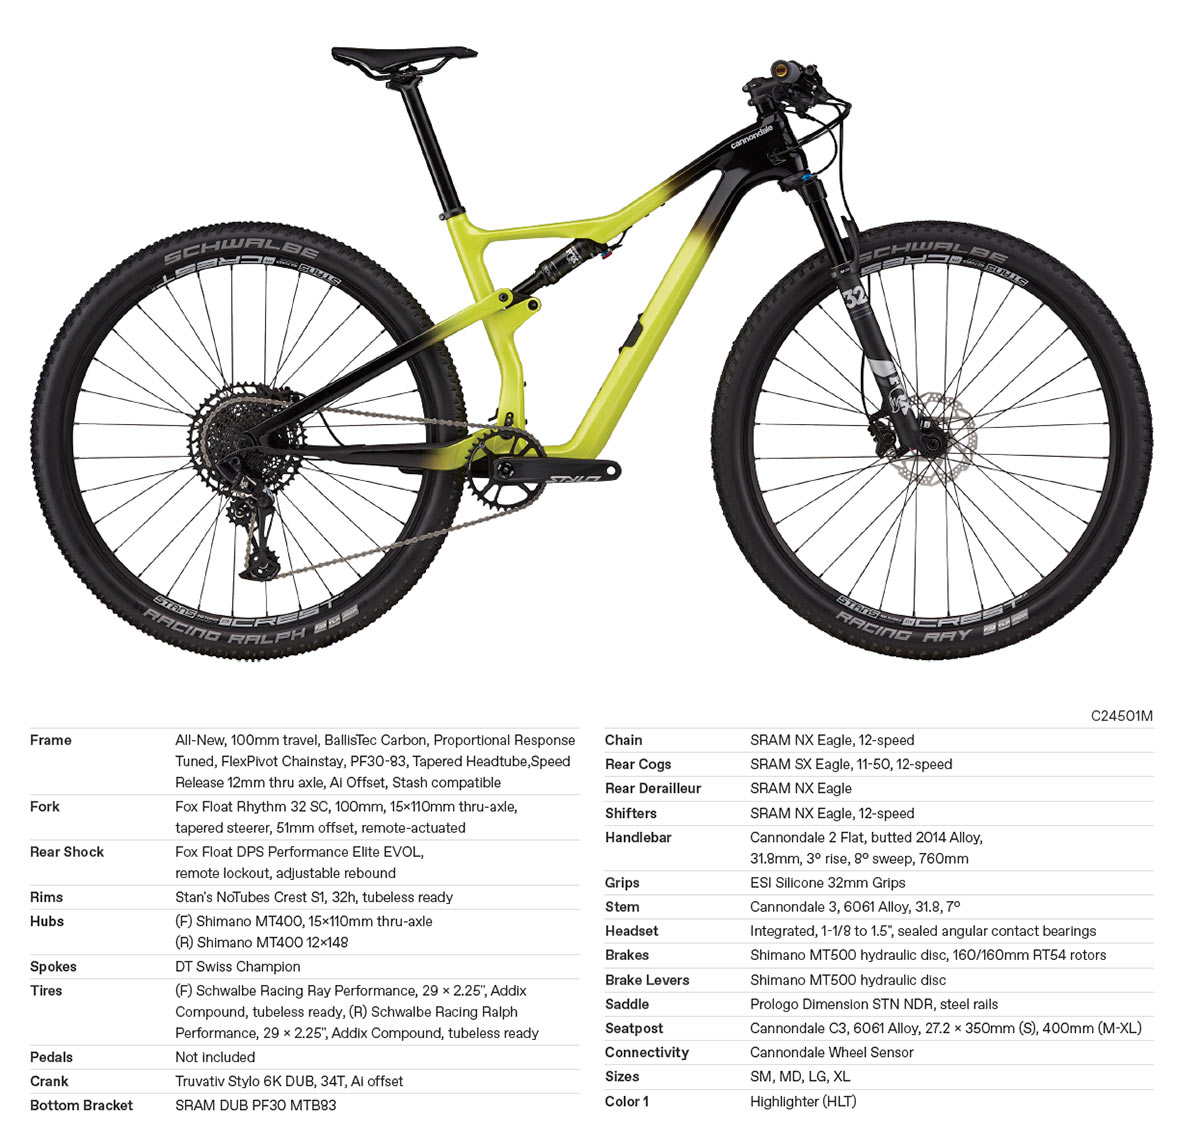 2021 Cannondale Scalpel - Complete models, specs & pricing 